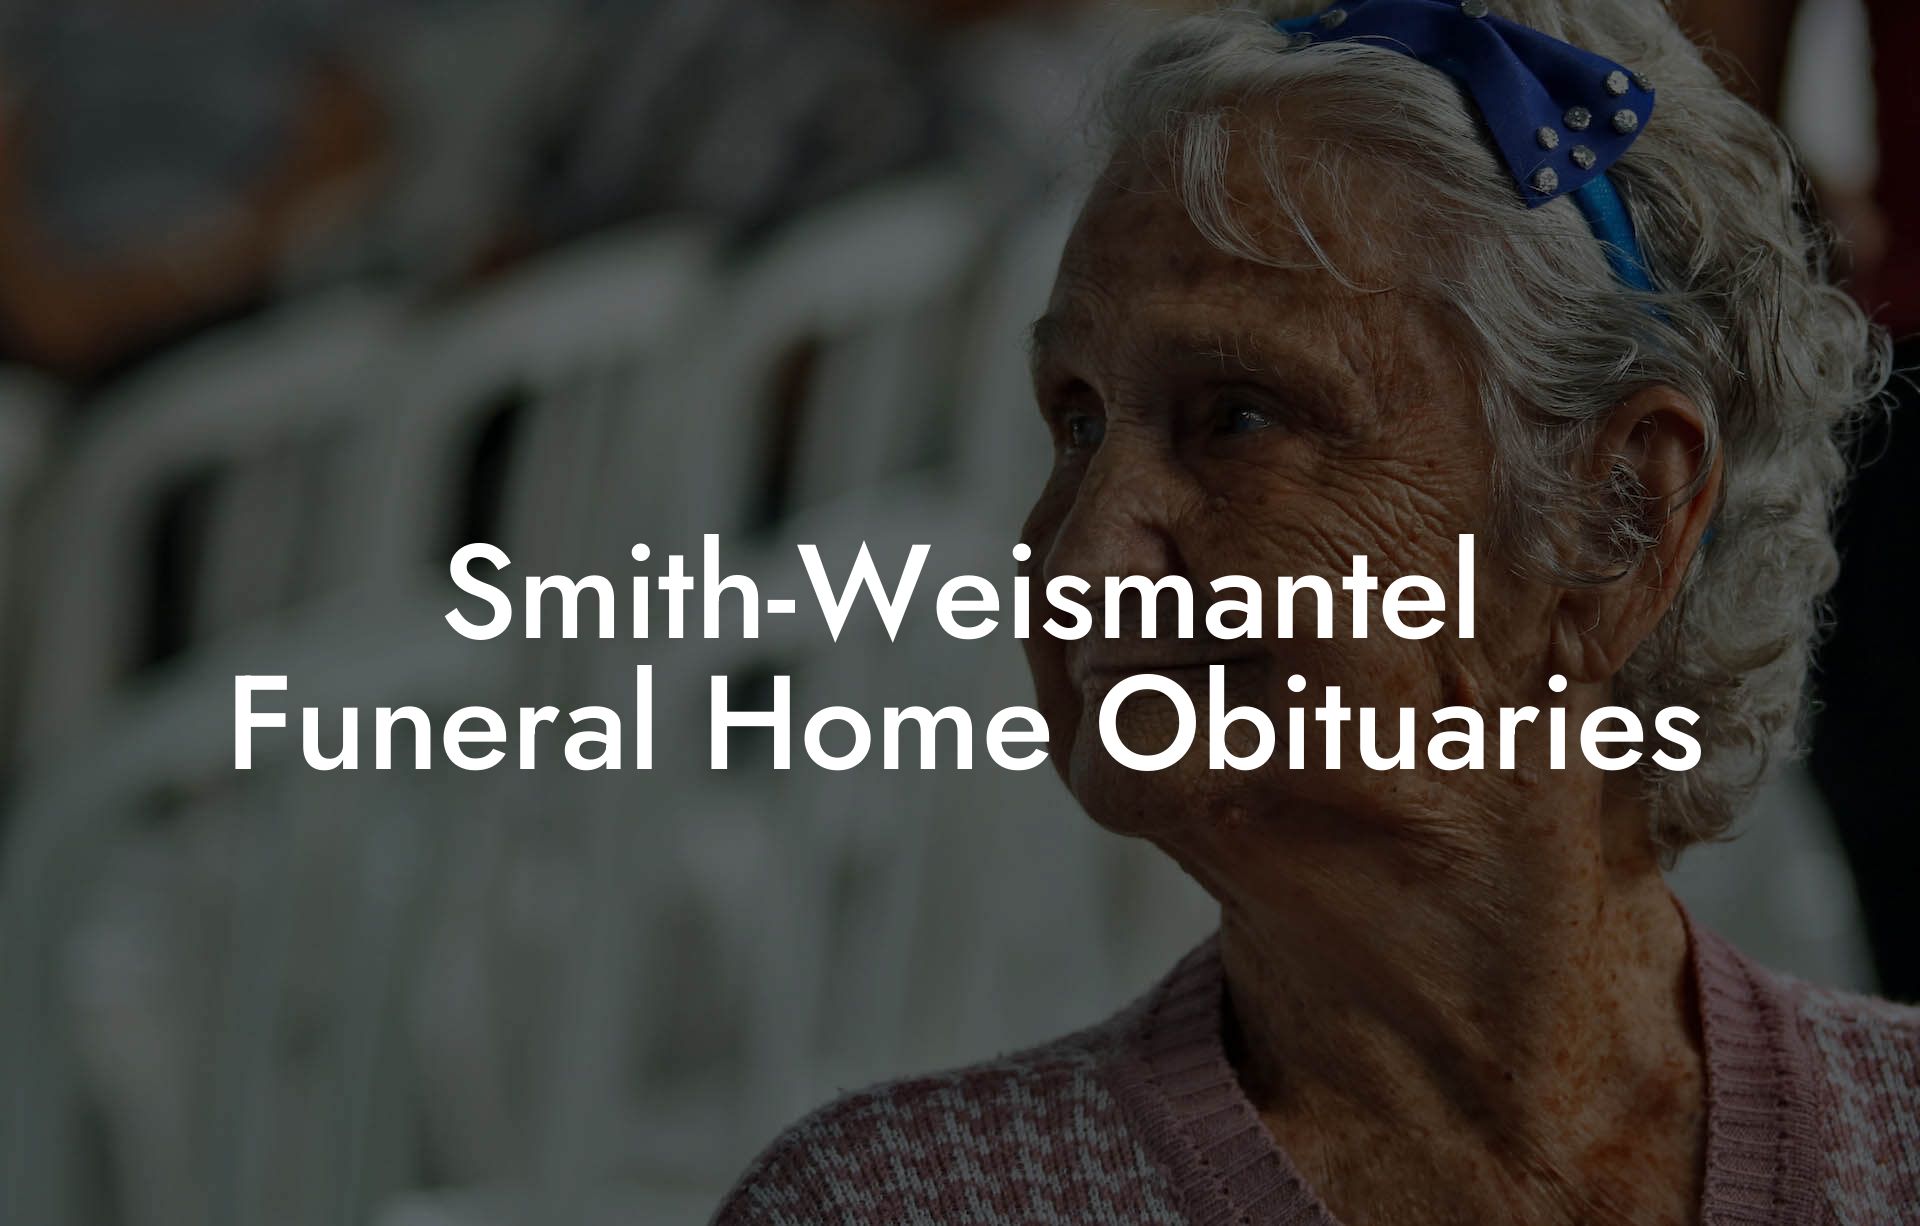 Smith-Weismantel Funeral Home Obituaries